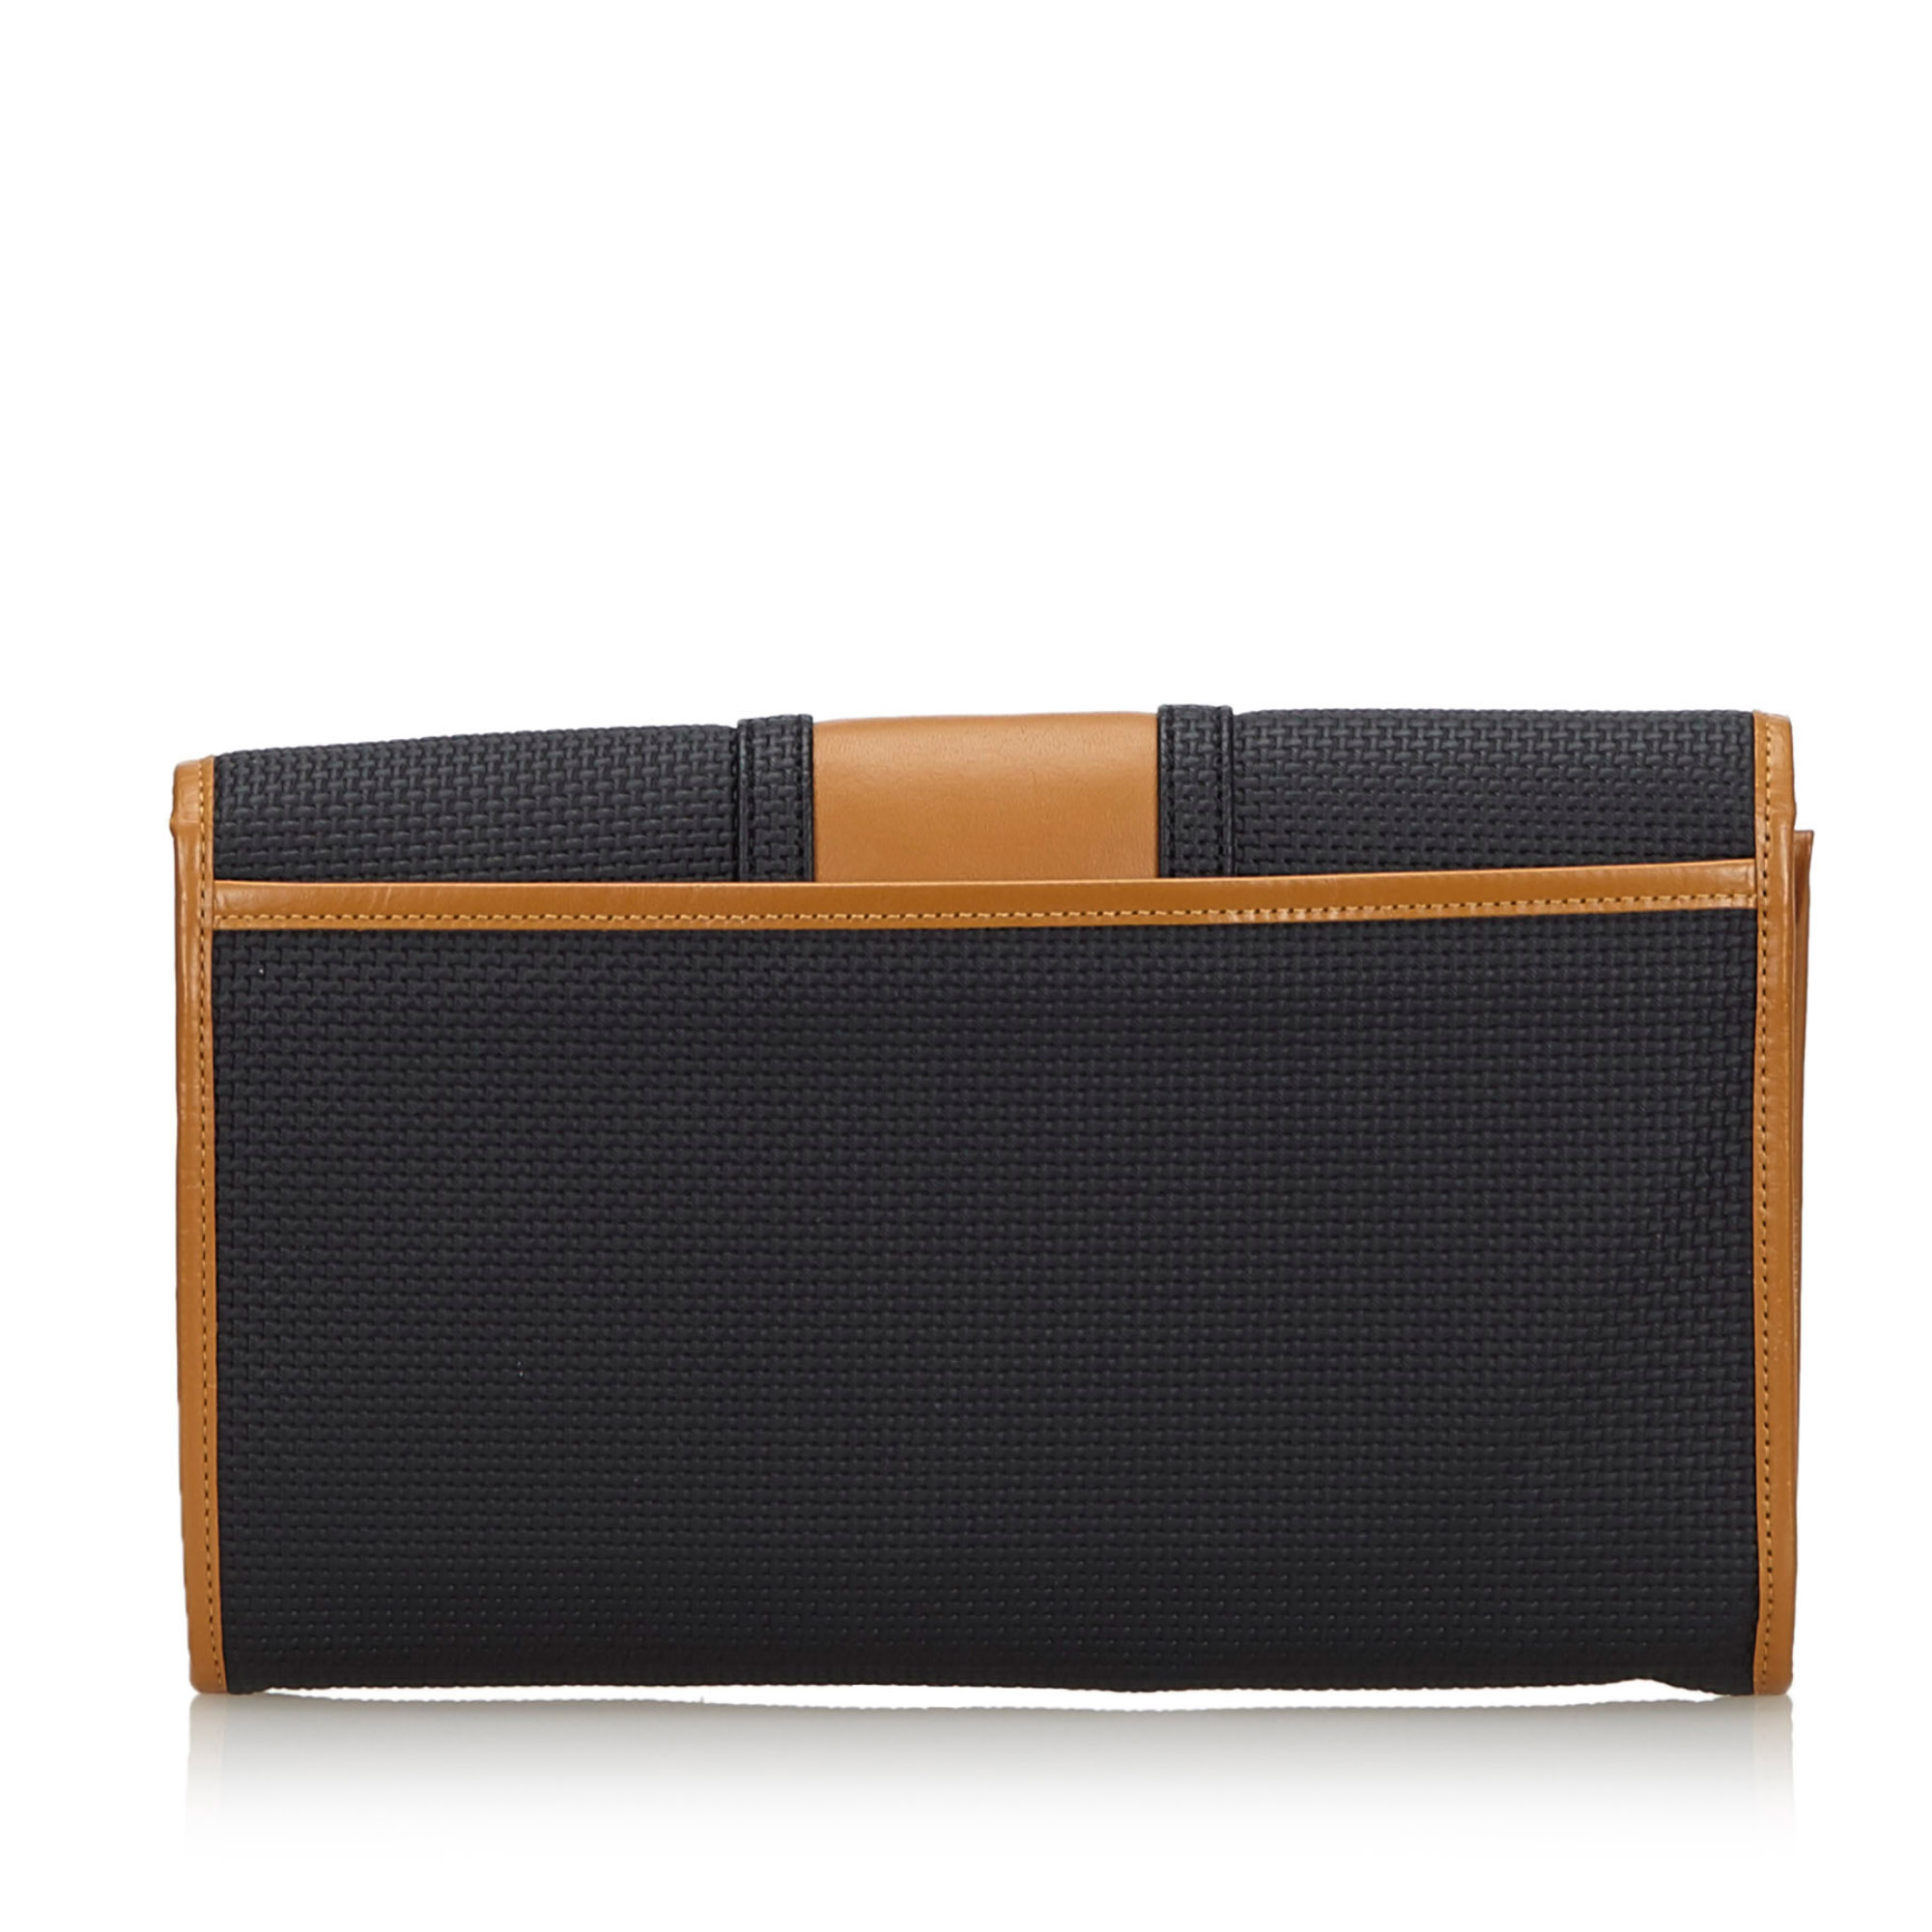 YSL Woven Flap Clutch Bag, this clutch bag features a PVC body with leather trim, a front flap - Image 3 of 8